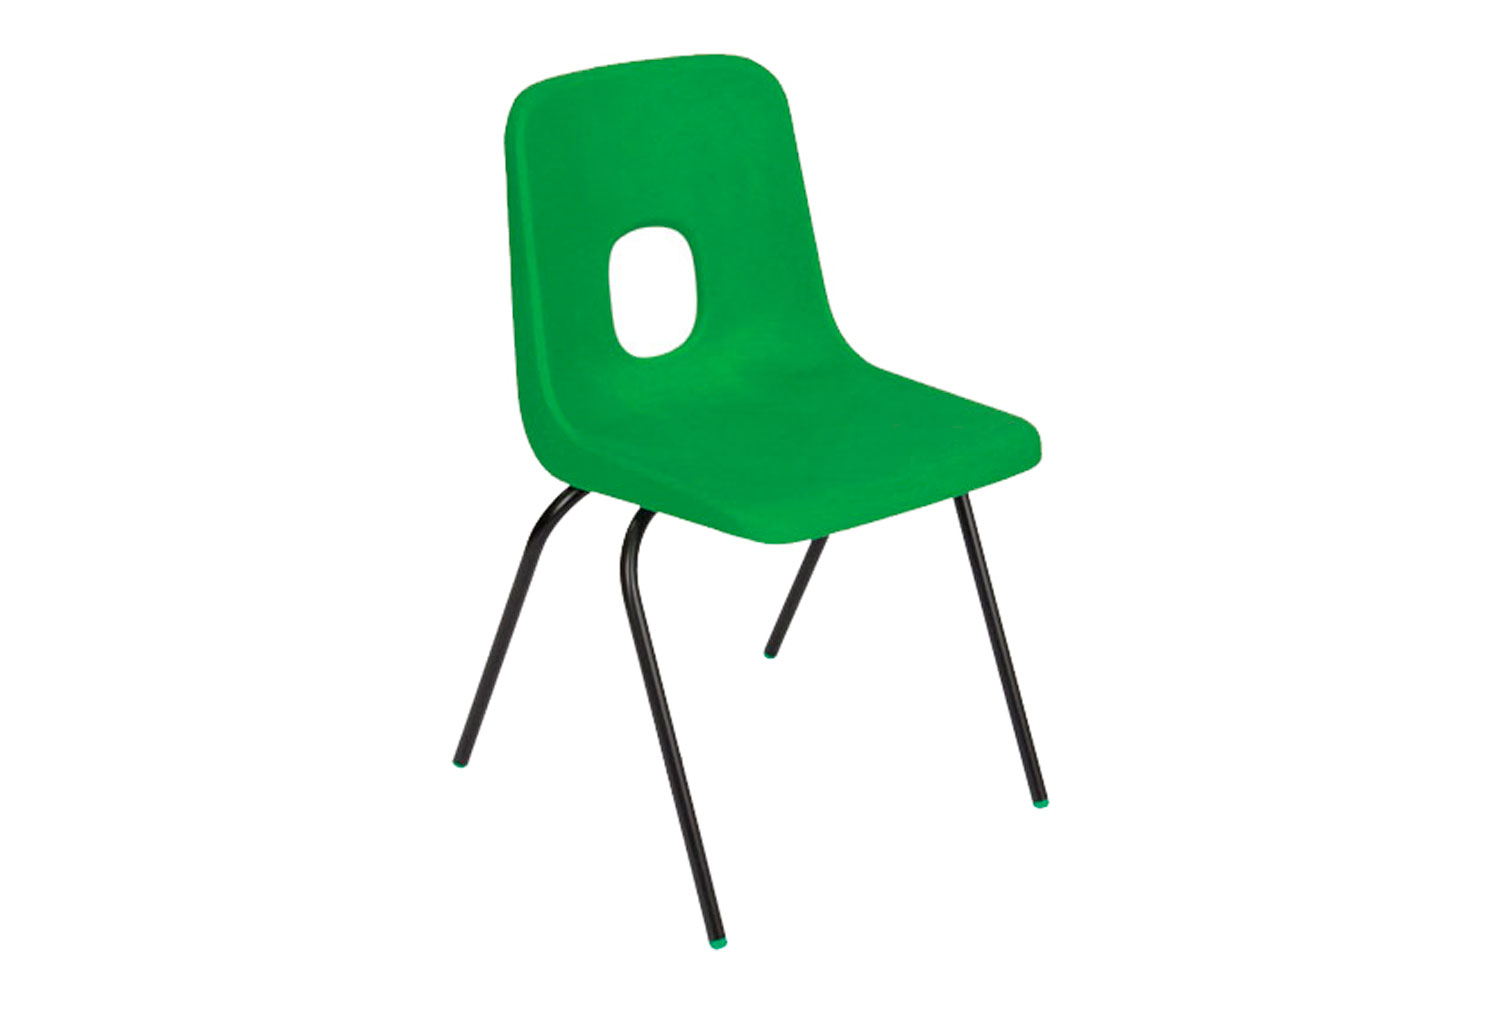 Qty 8 - Hille E Series Classroom Chair, 14+ Years - 41wx37dx46h (cm), Black Frame, Green